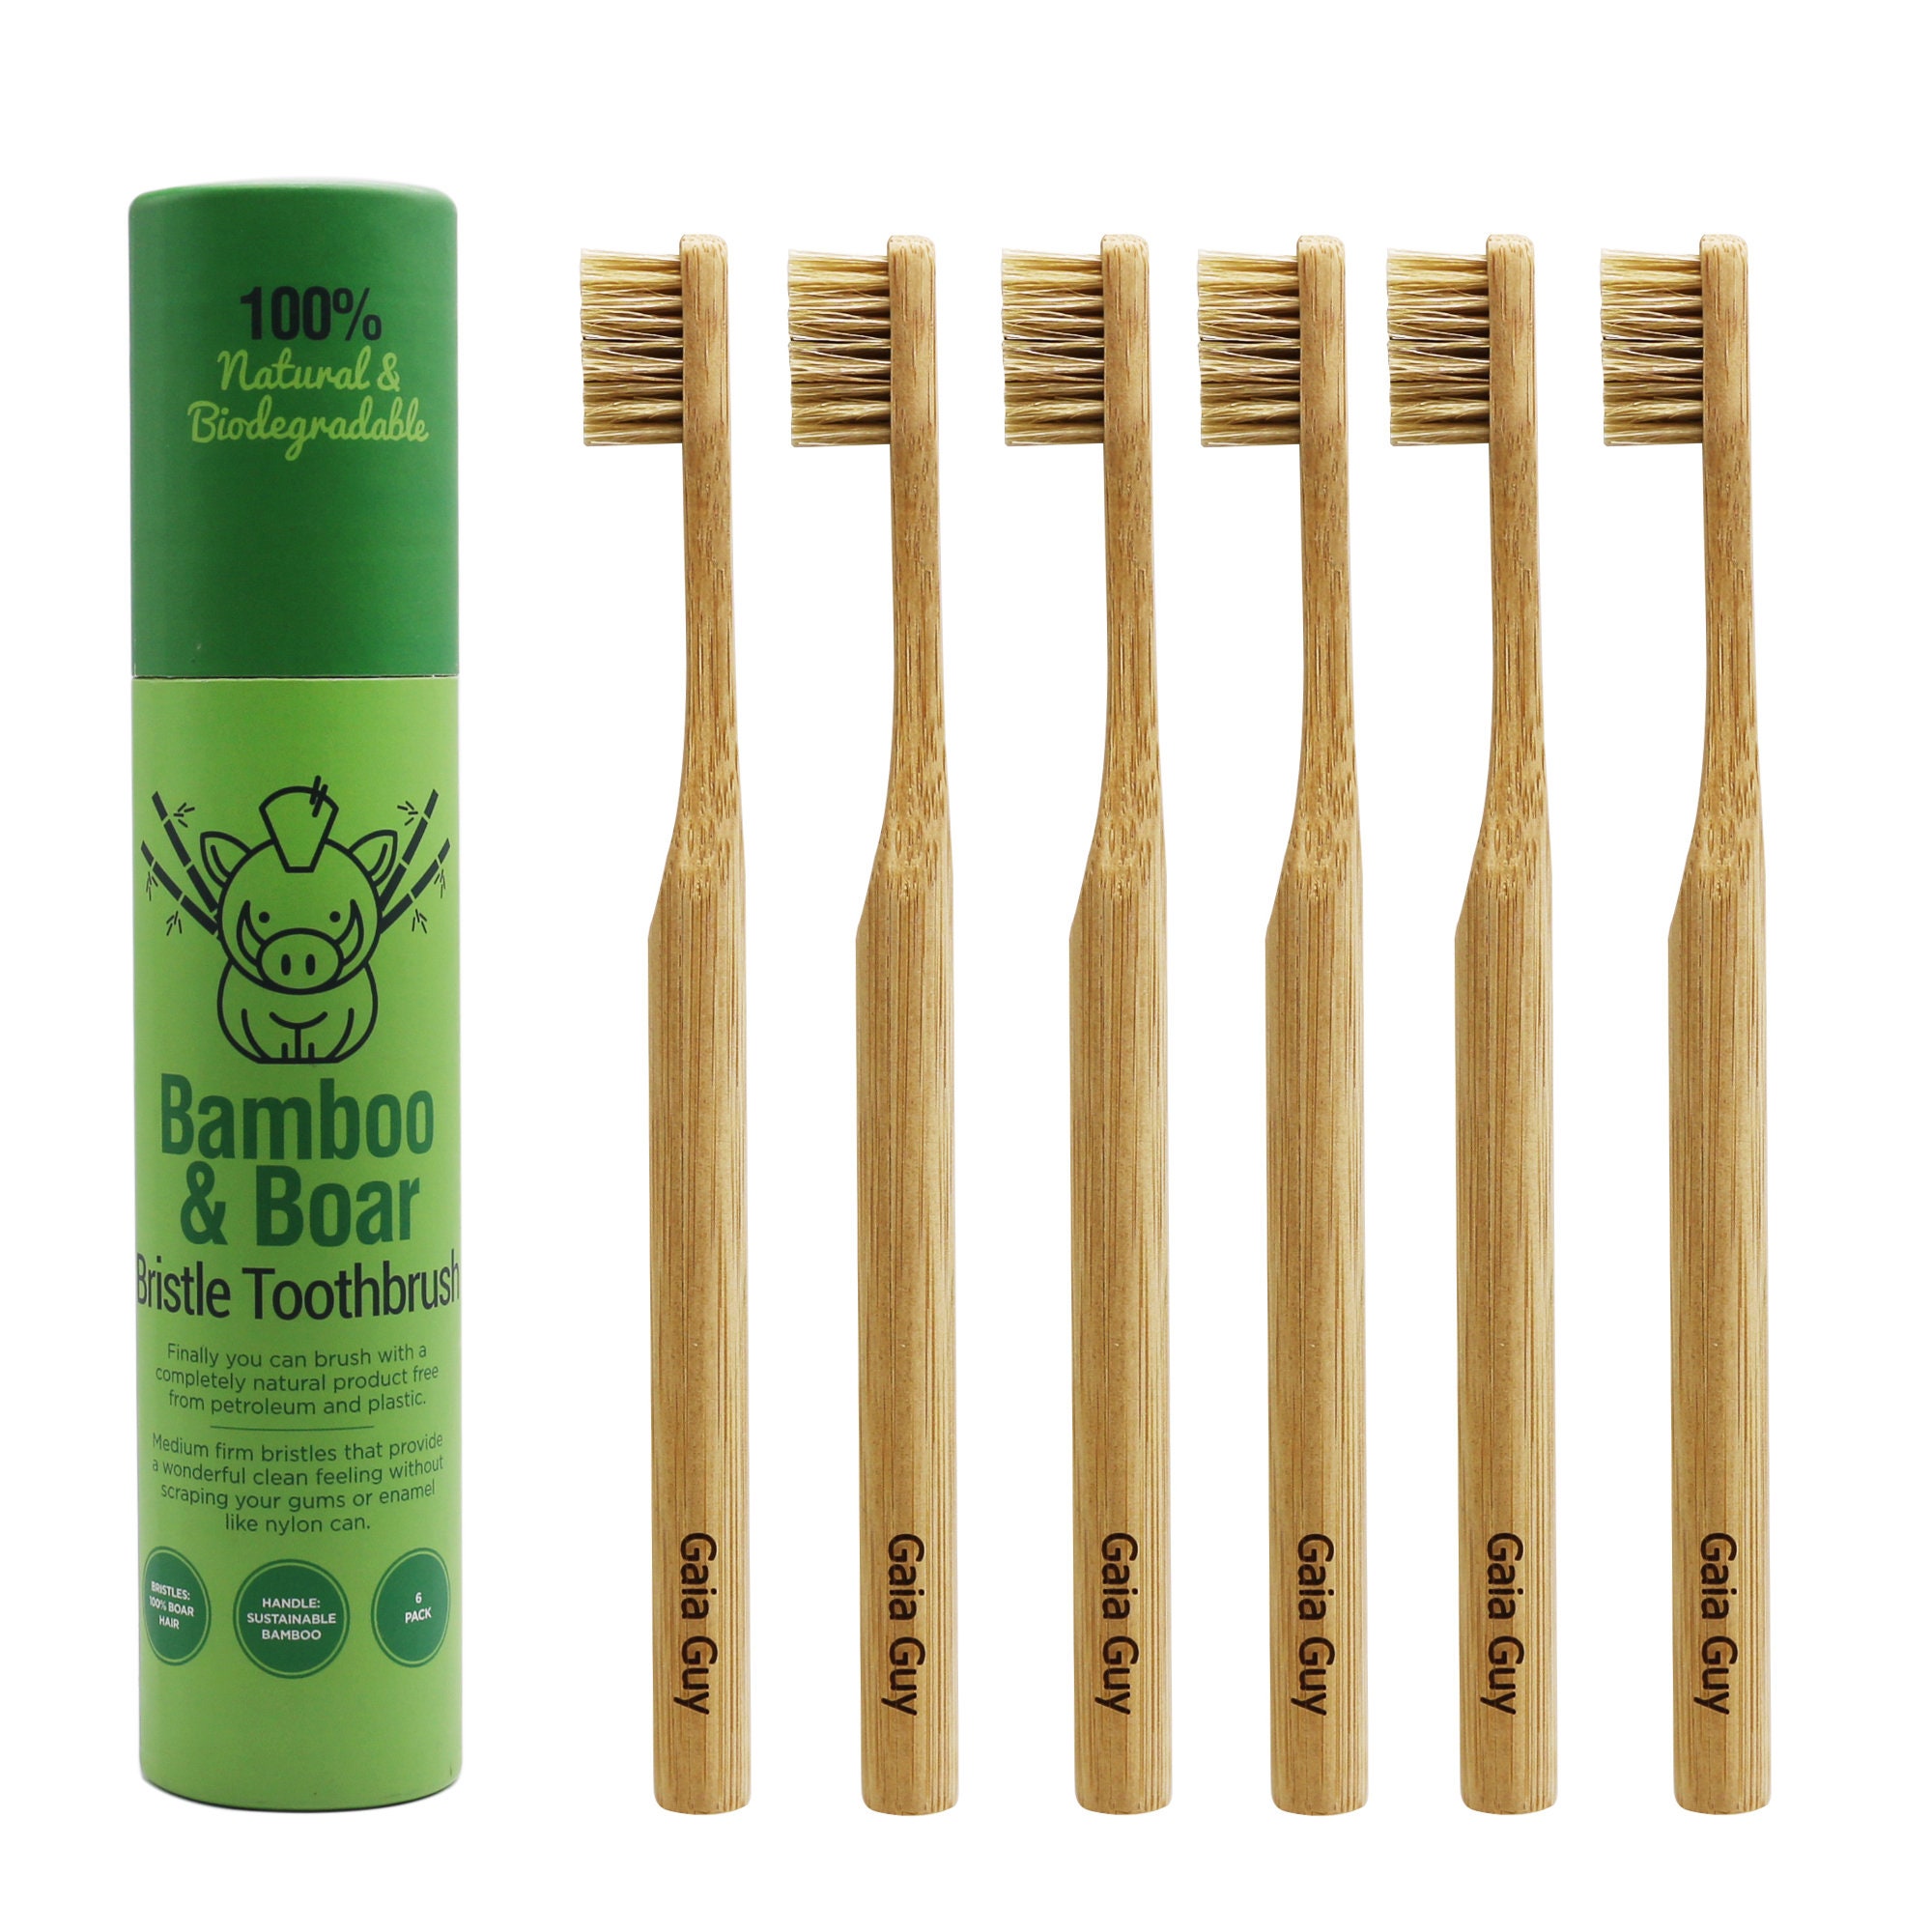 Palms Soft Bristle Fading & Cleaning Brush